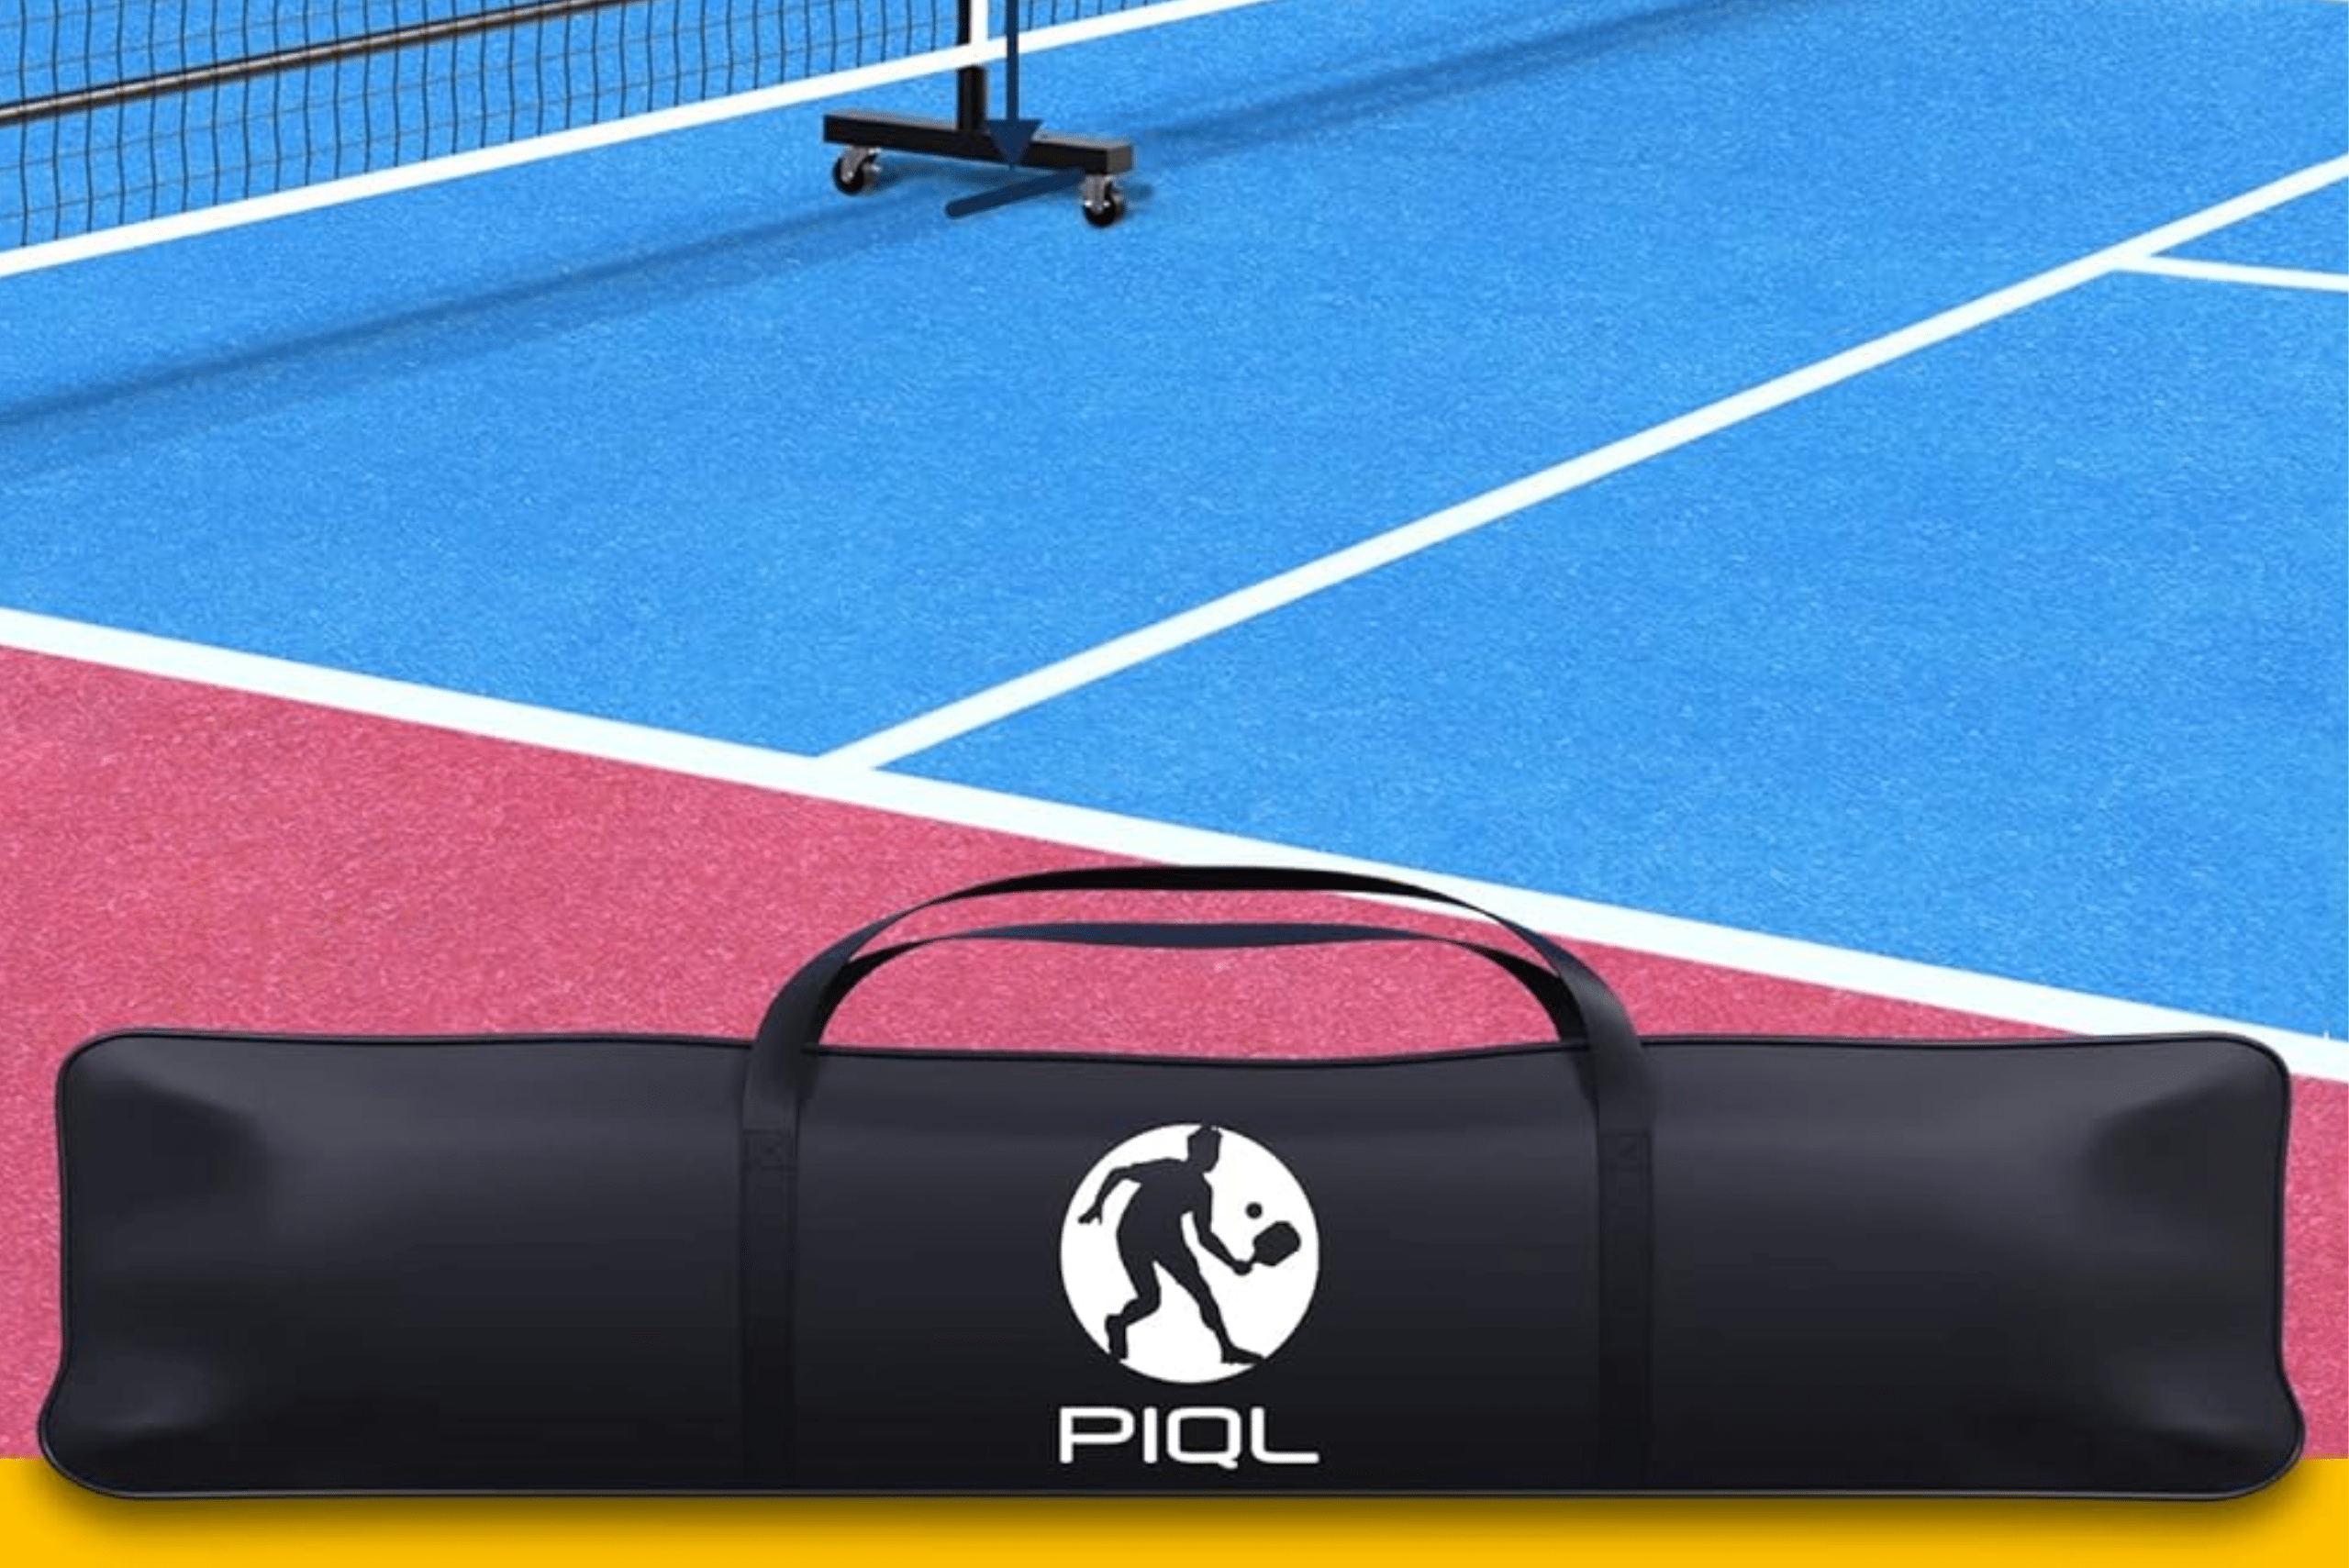 A duffle bag for carrying a pickleball net.